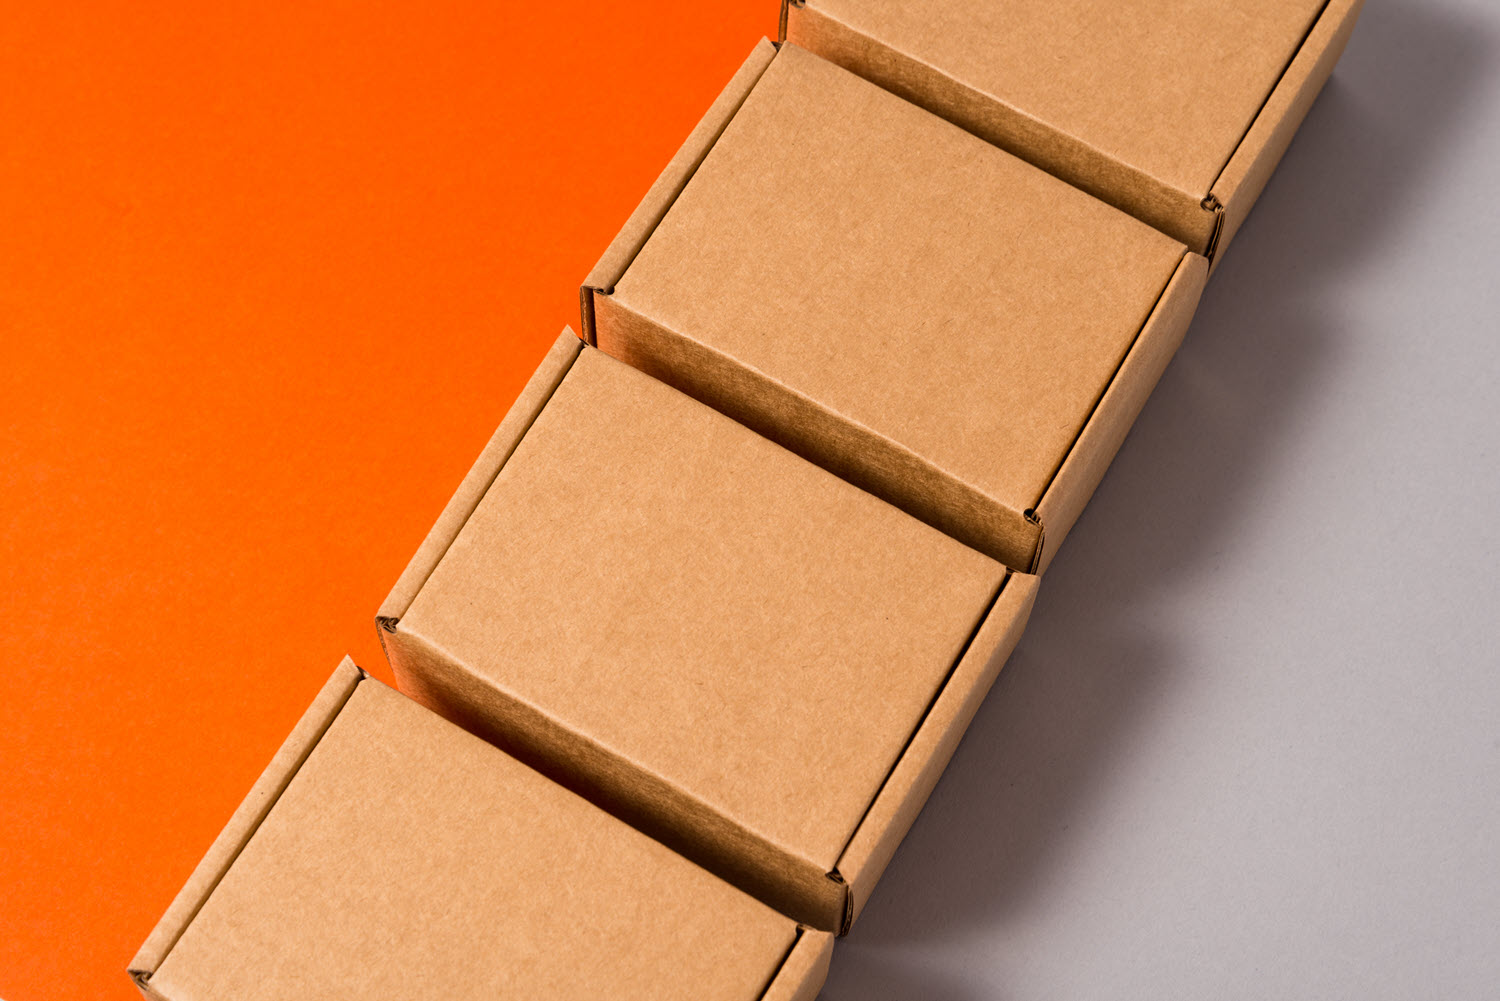 A row of shipping boxes for subscription orders, which can be efficiently packed and shipped by pre-manifesting on a multi-carrier shipping system.